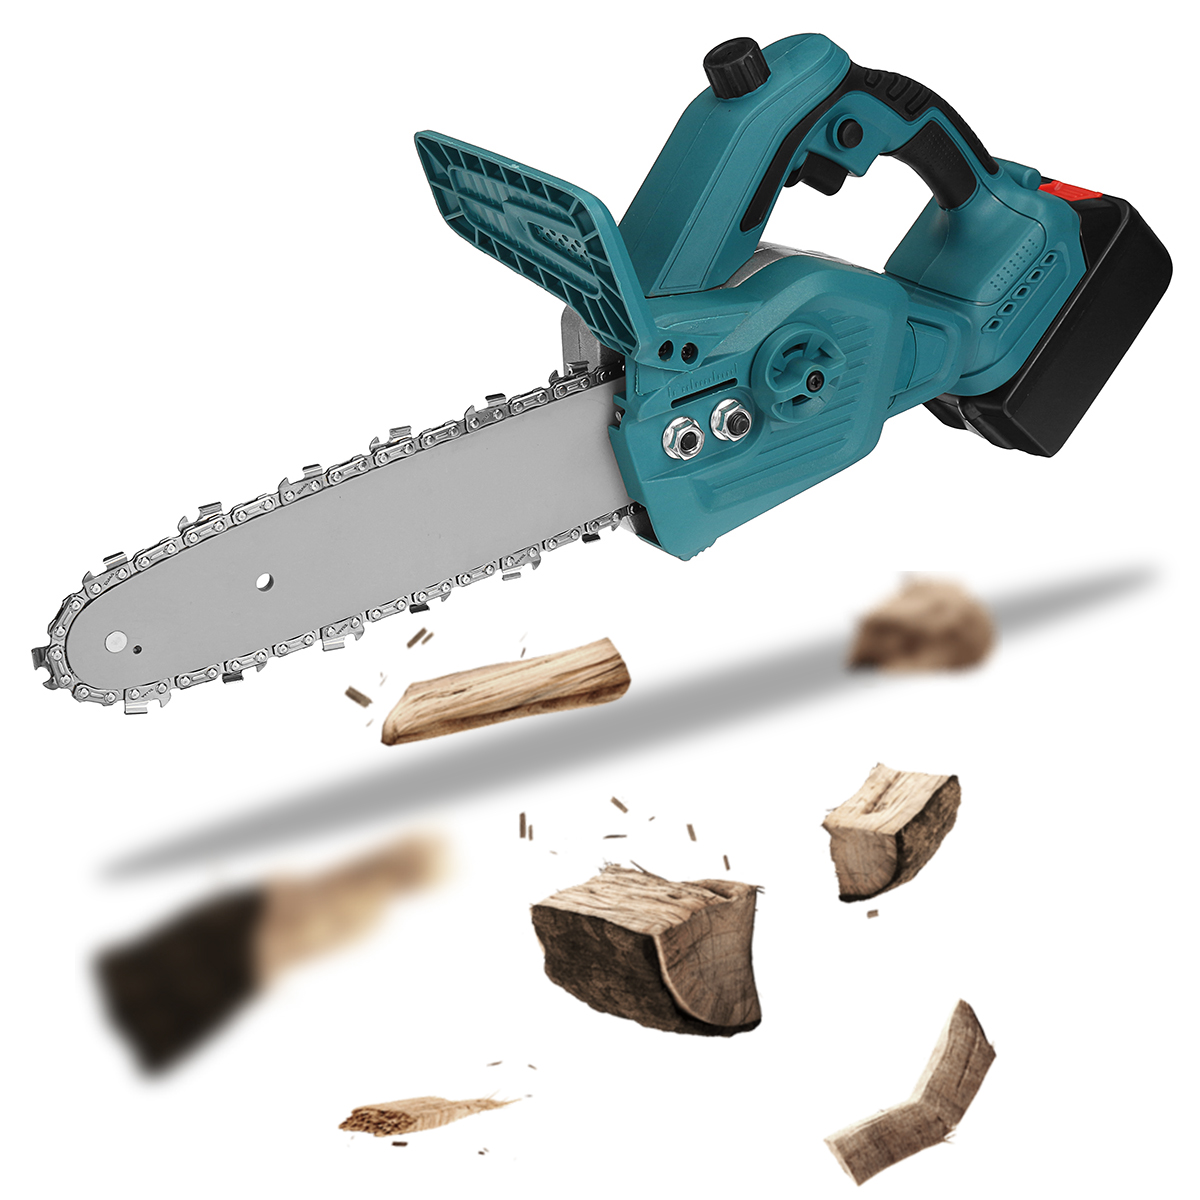 288VF-300W-10In-One-hand-Electric-Rechargeable-Chain-Saw-Cordless-Chainsaw-Wood-Cutter-Woodworking-T-1896287-4